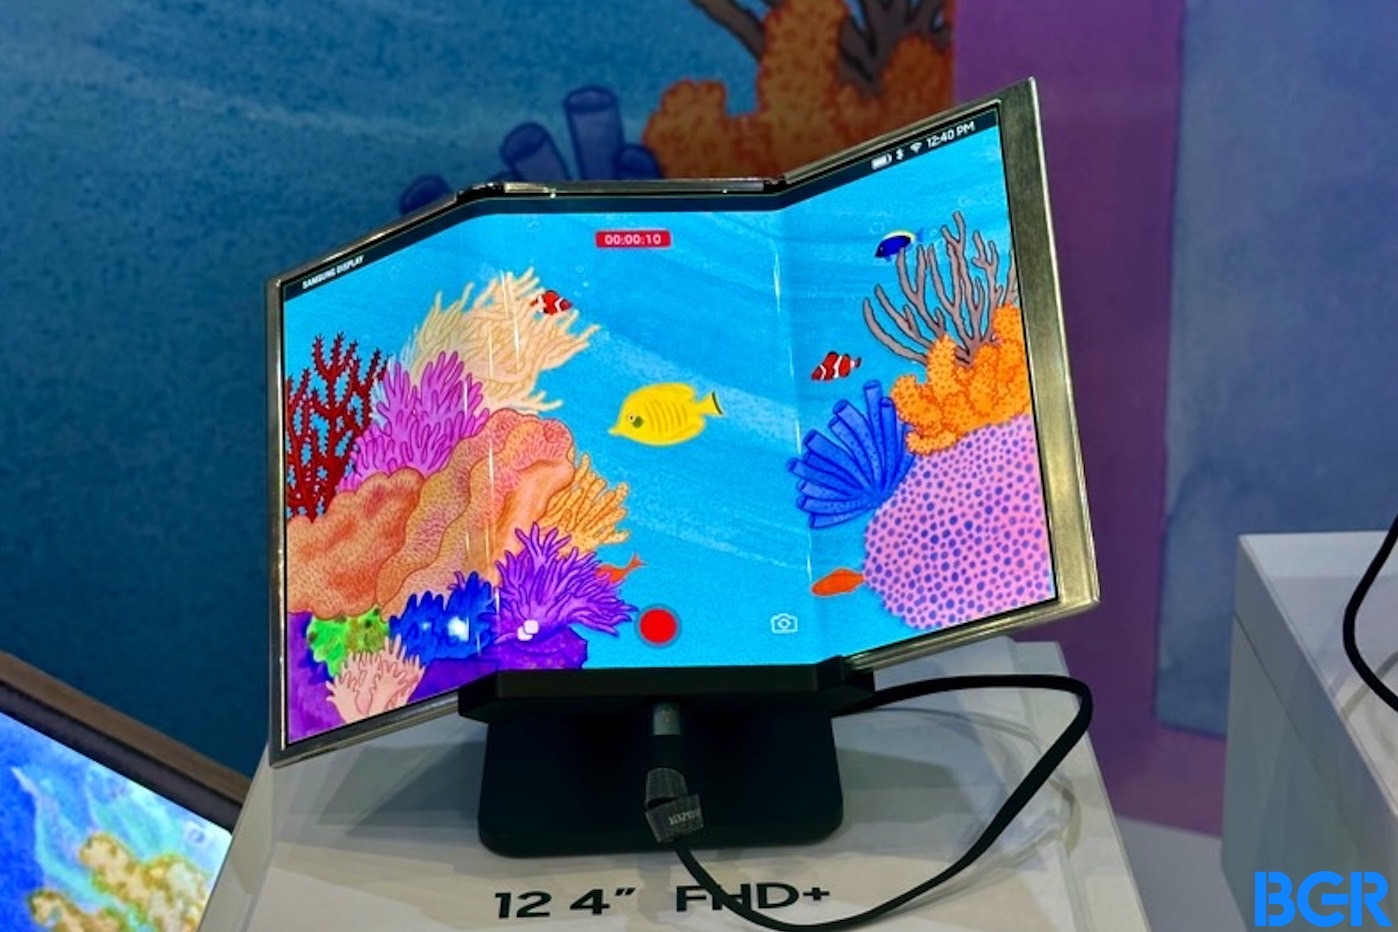 Triple foldable displays might feature this type of Samsung Display screen.